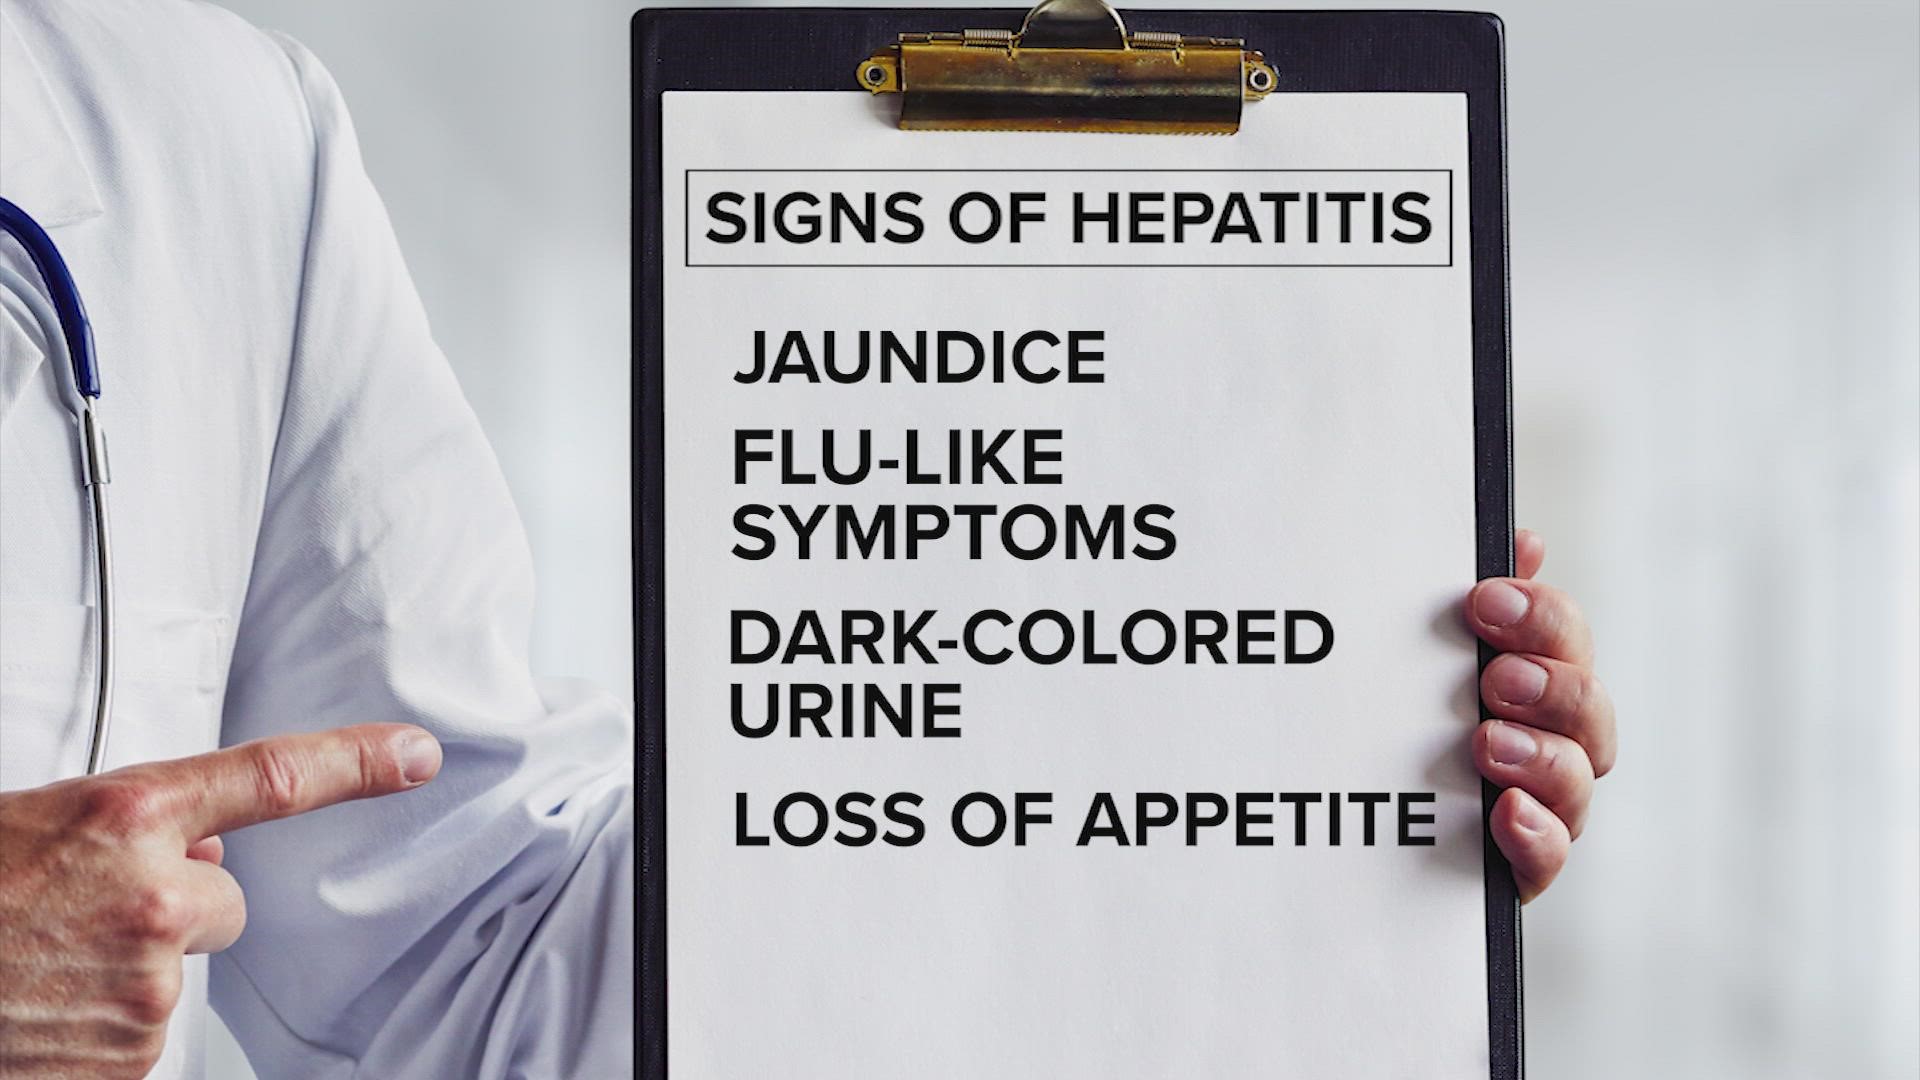 Signs of hepatitis include jaundice – the yellowing of the skin, or whites of the eyes – dark-colored urine, flu-like symptoms, and loss of appetite.